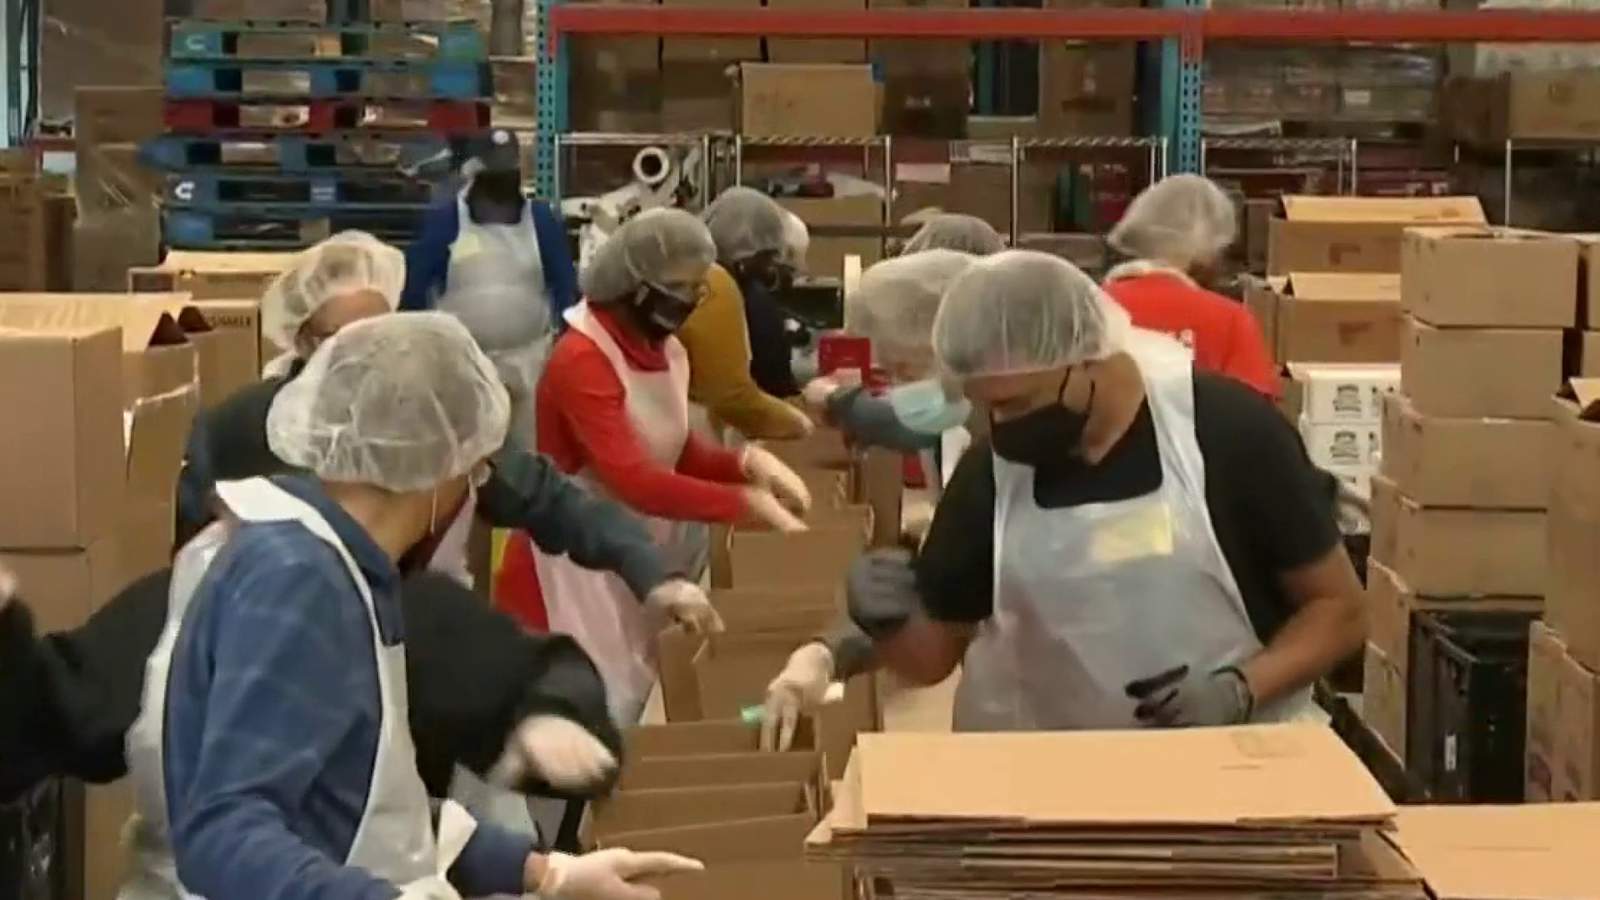 35,000 meals packed for kids in need to honor Dr. Martin Luther King, Jr.